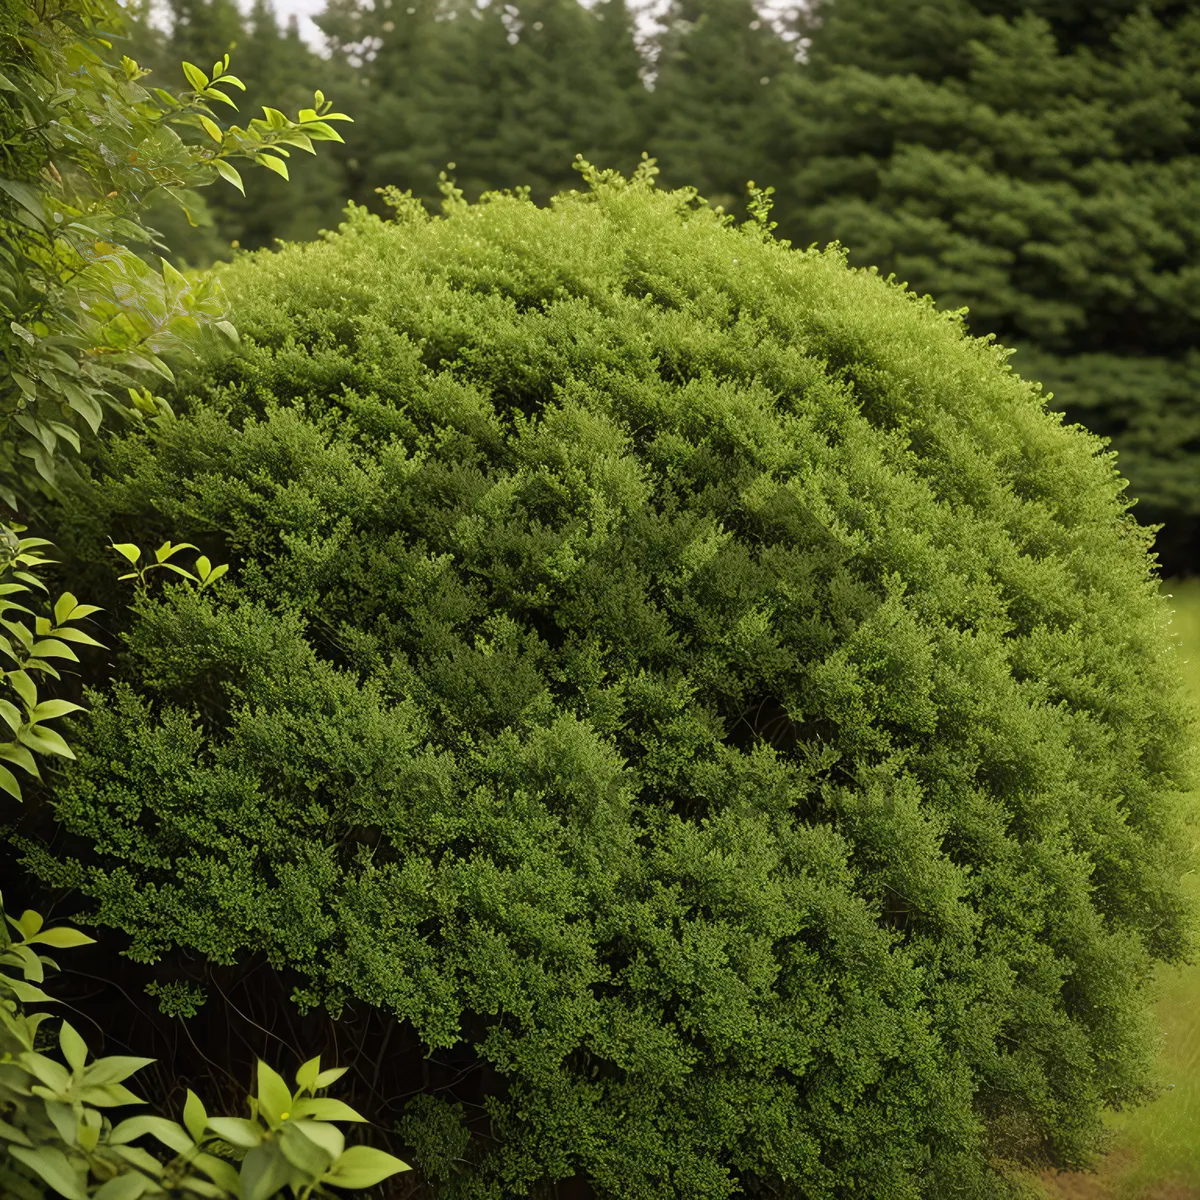 Picture of Lush Summer Landscape with Privet Shrub in Park